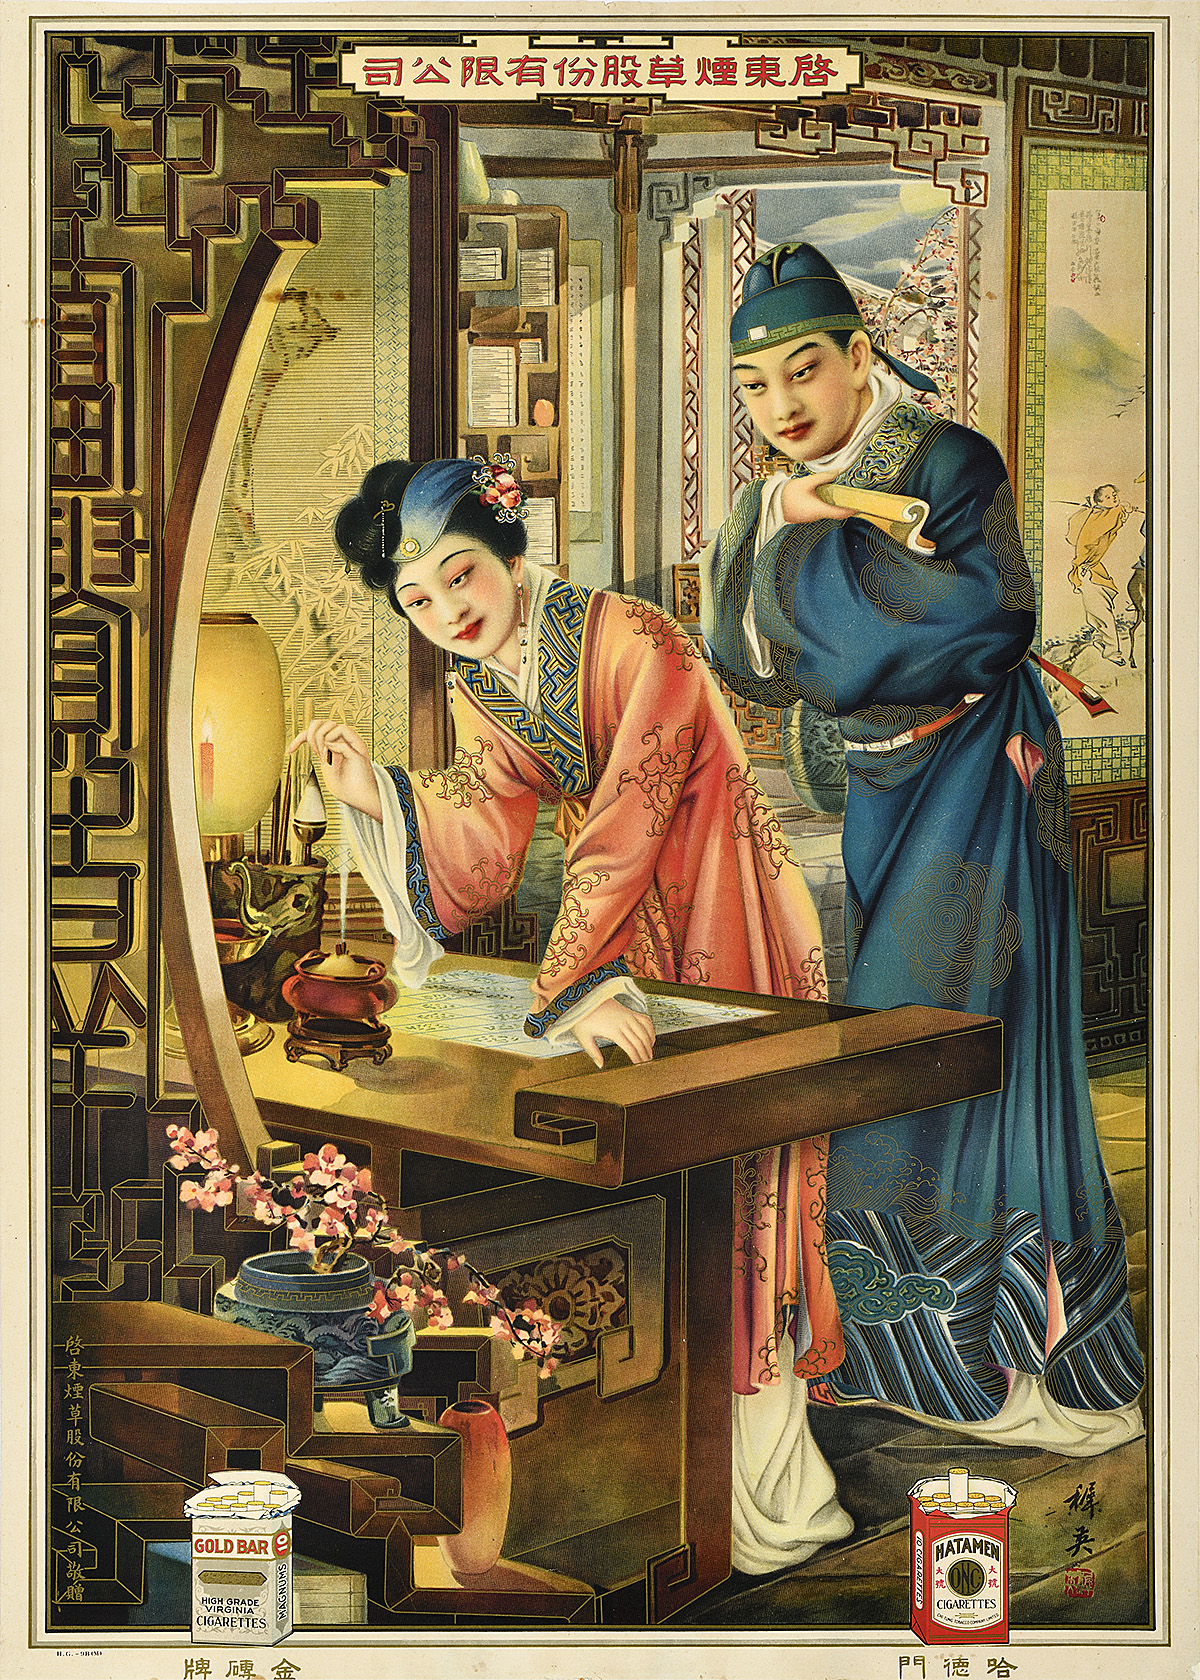 illustrational poster of an Asian man and woman dressed traditionally within a domestic interior